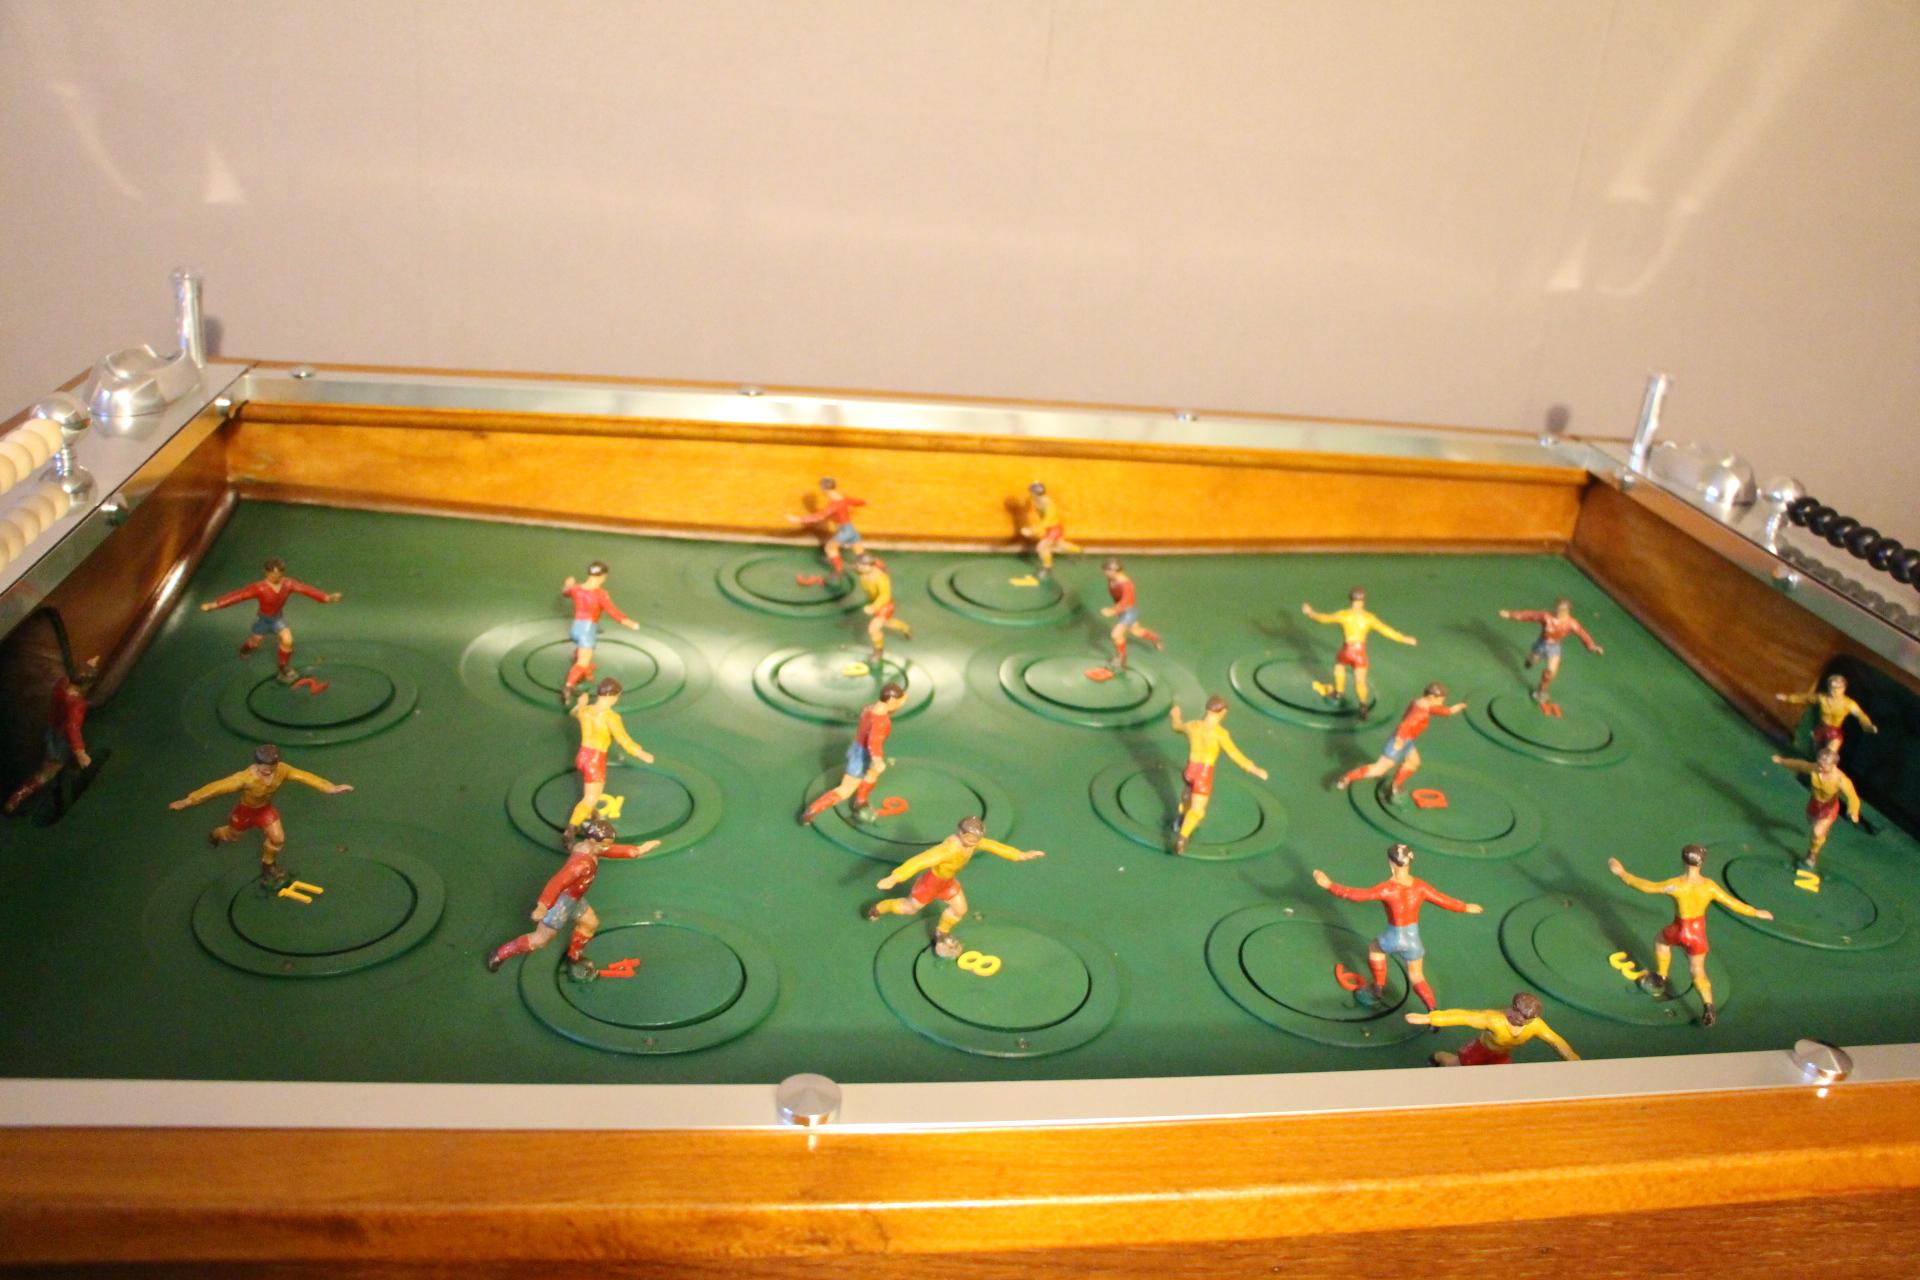 1930s French Foosball Table, Foosball Counter Table, Sportfoot Table 2